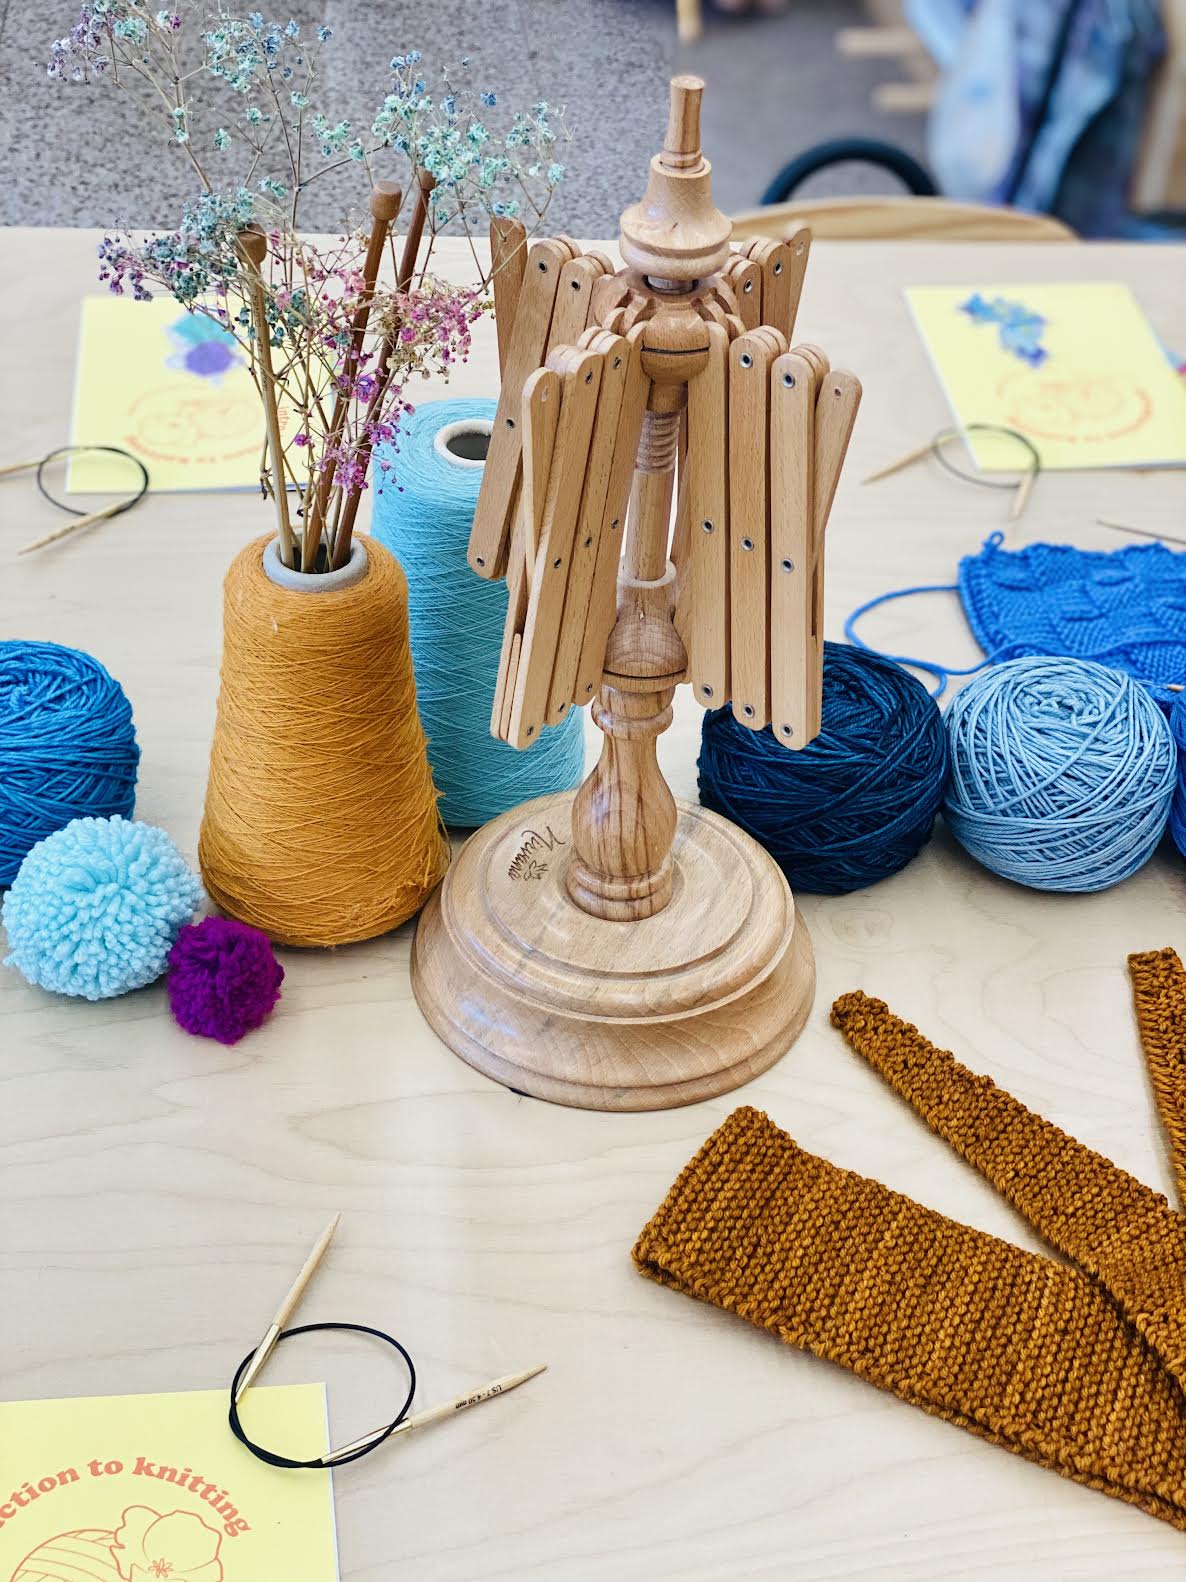 OCT 5th IN-PERSON - Intro to Knitting with Arianna Perez